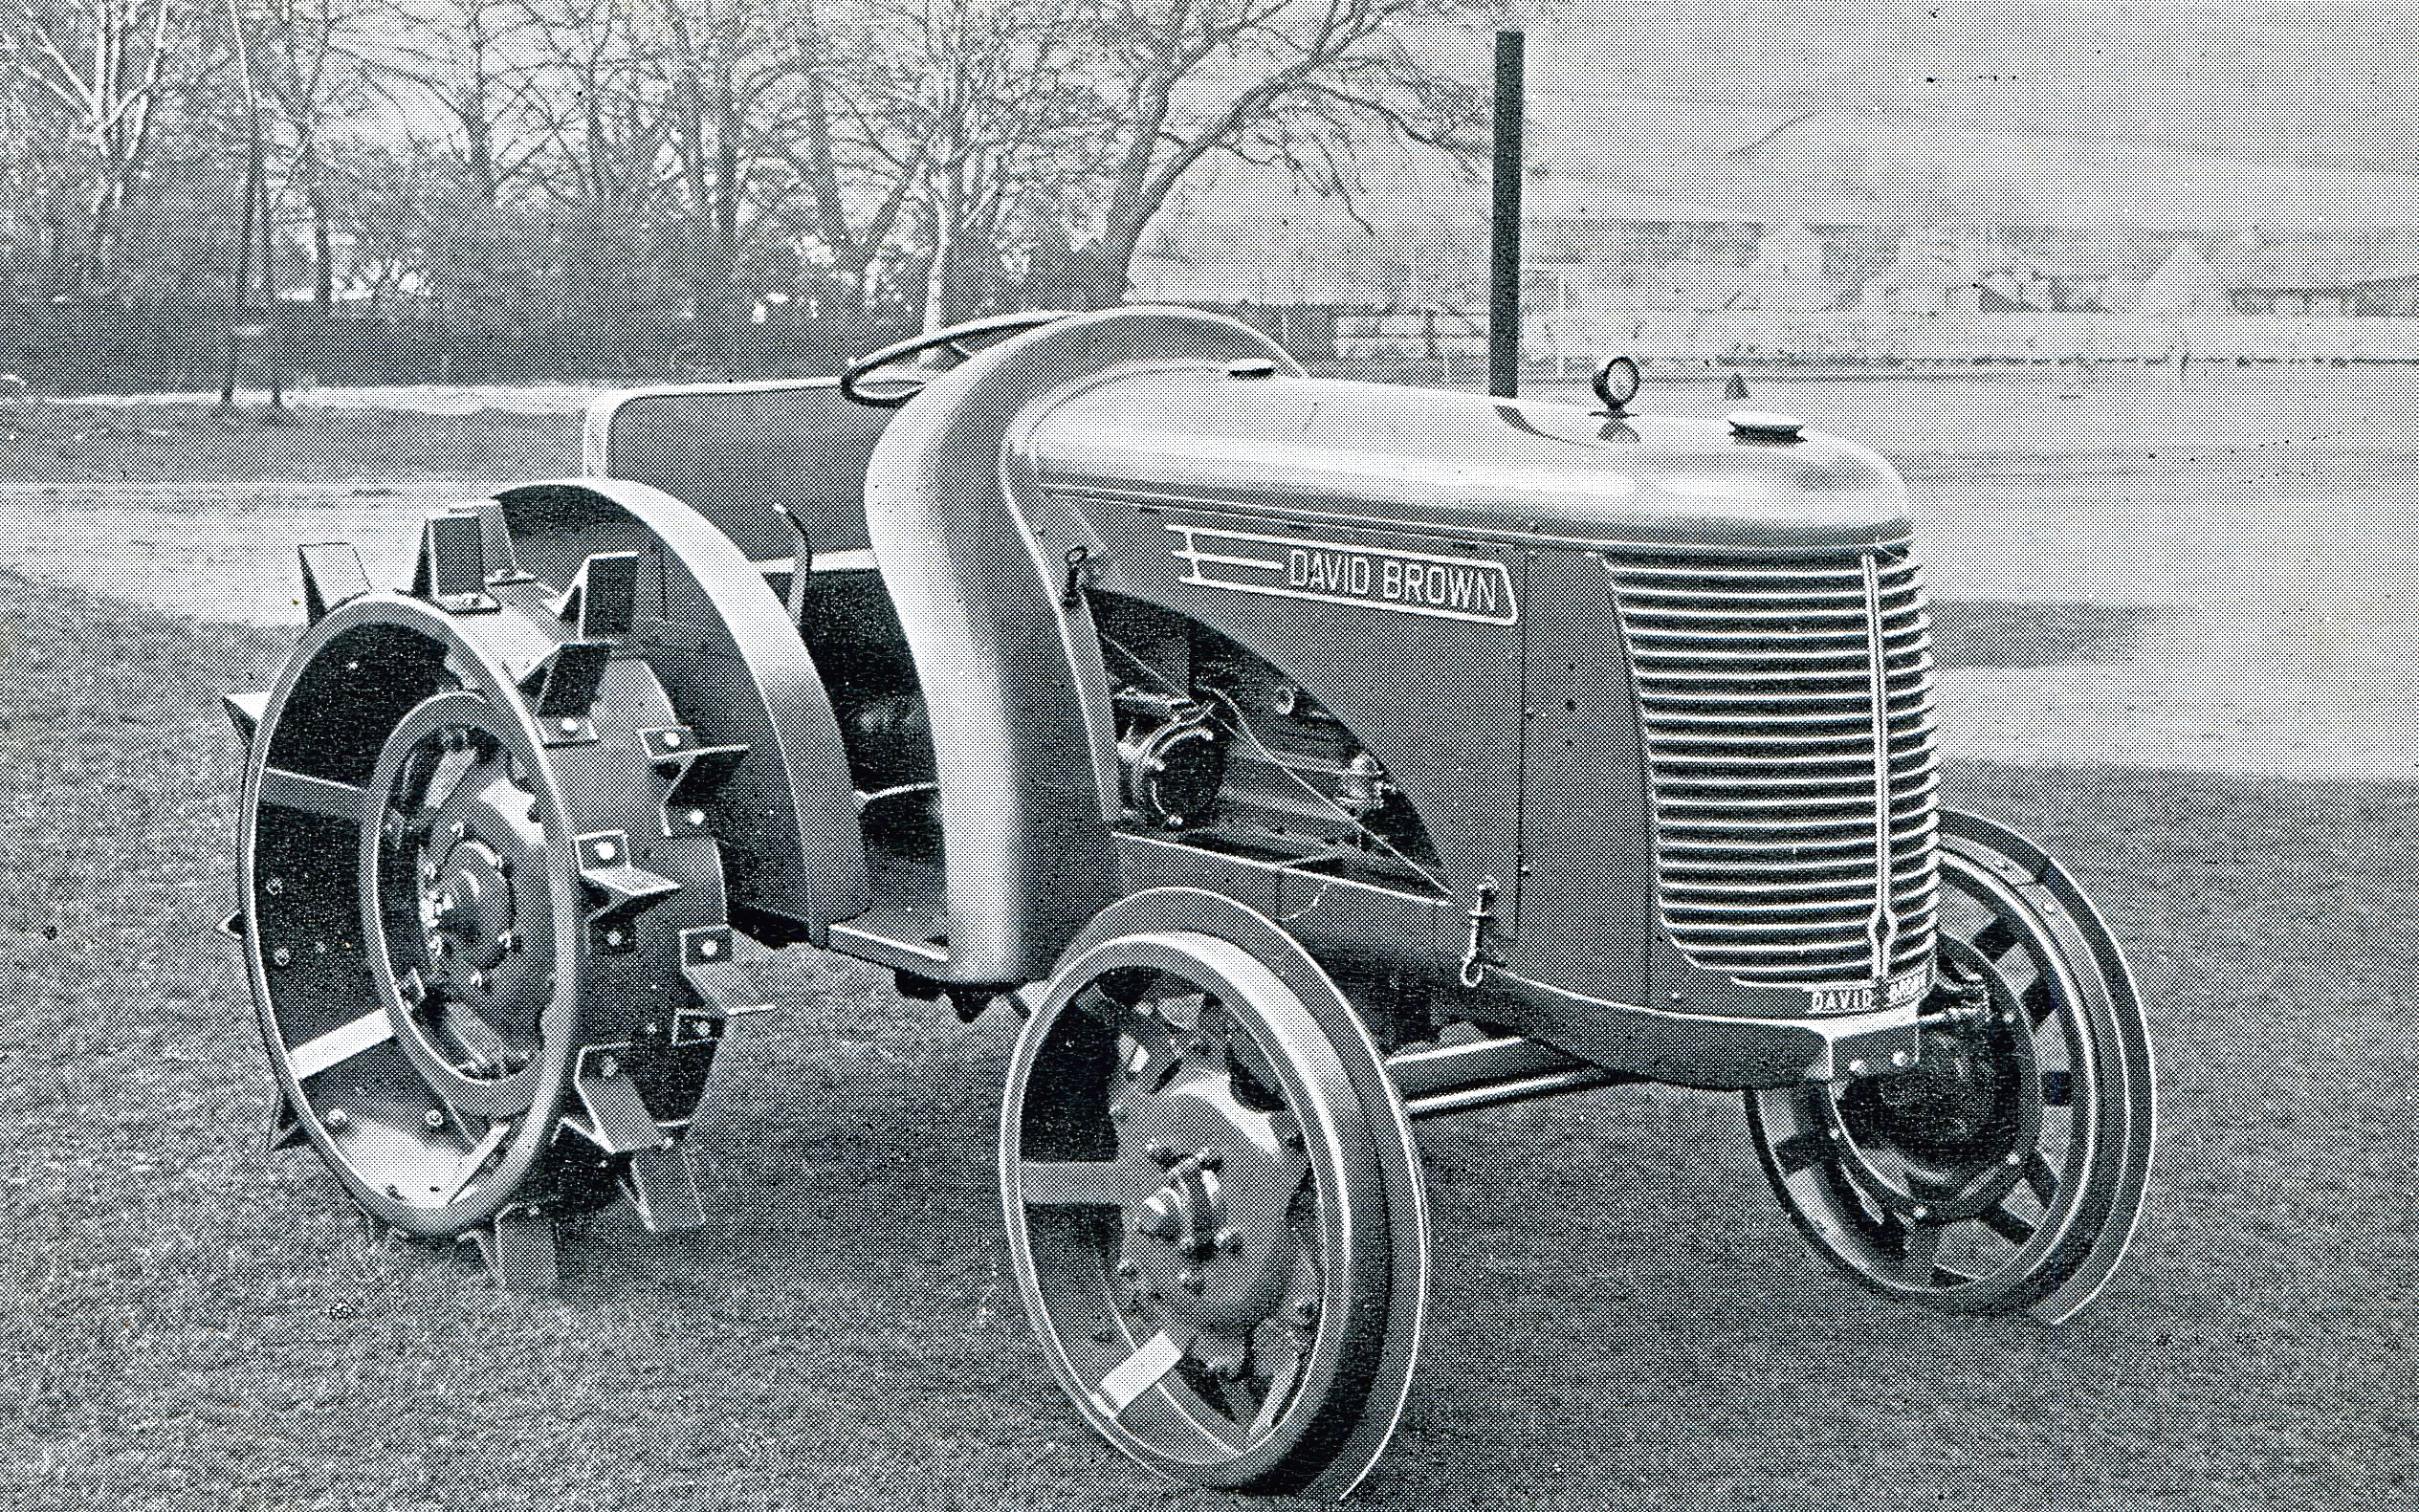 A period photo of the David Brown VAK1 fitted on iron wheels - although pneumatic versions were available, the shortages during WWII meant rubber tired versions were scarce.